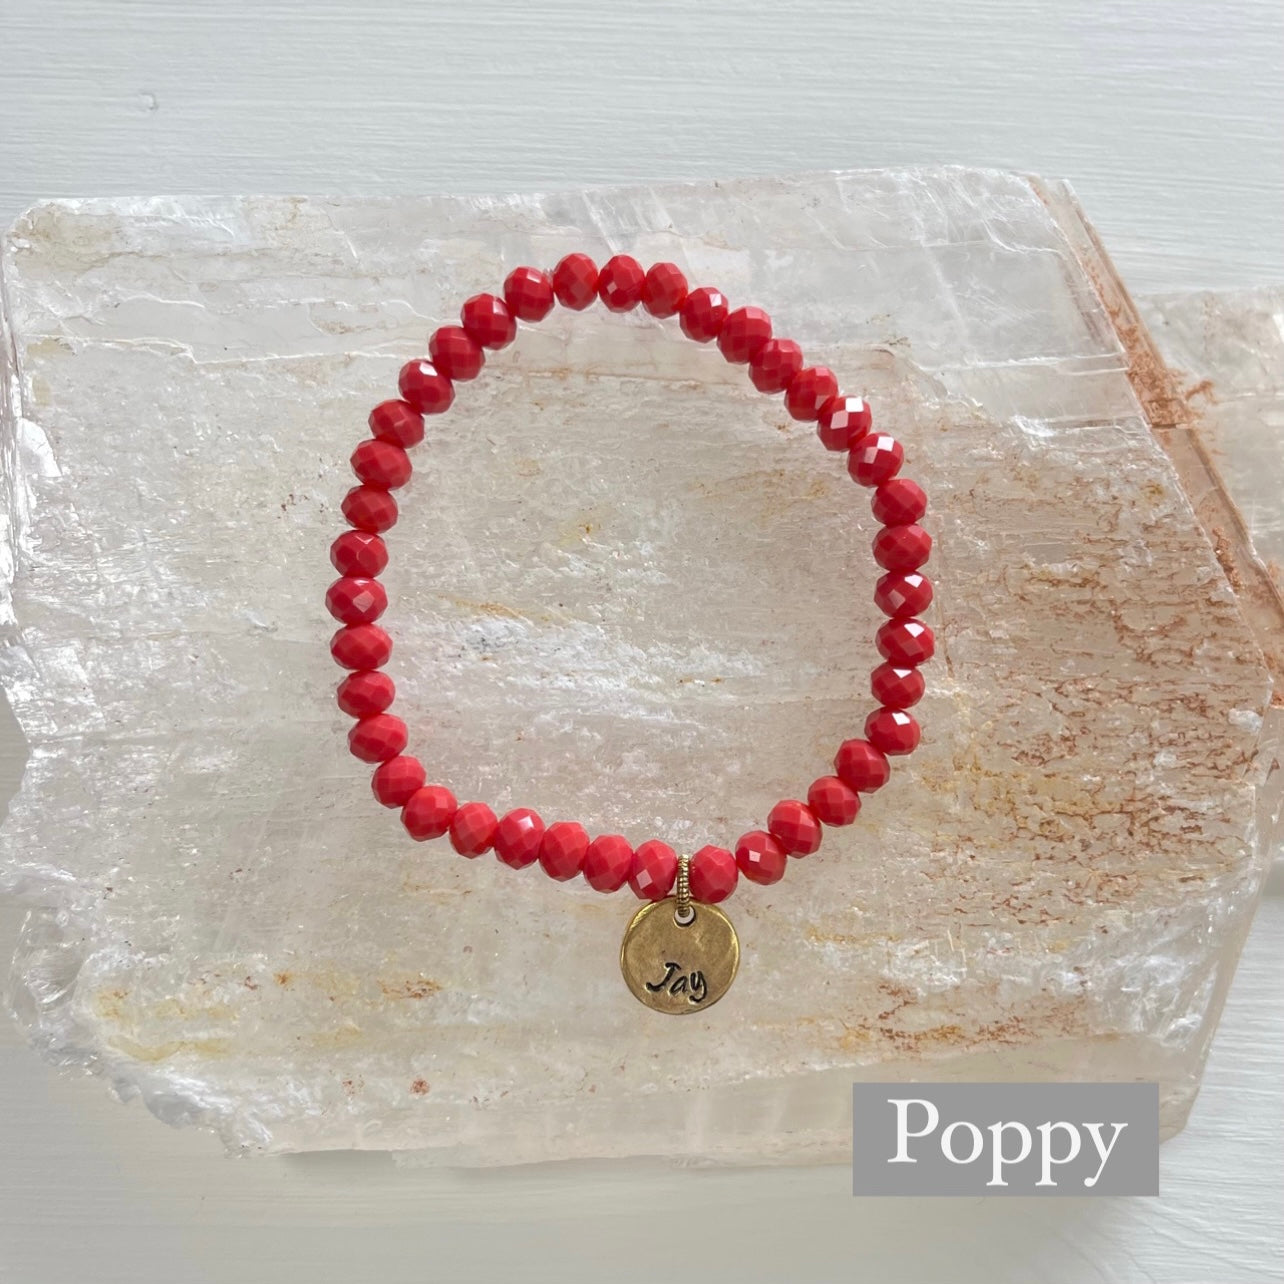 Personalized Crystal Stack Poppy